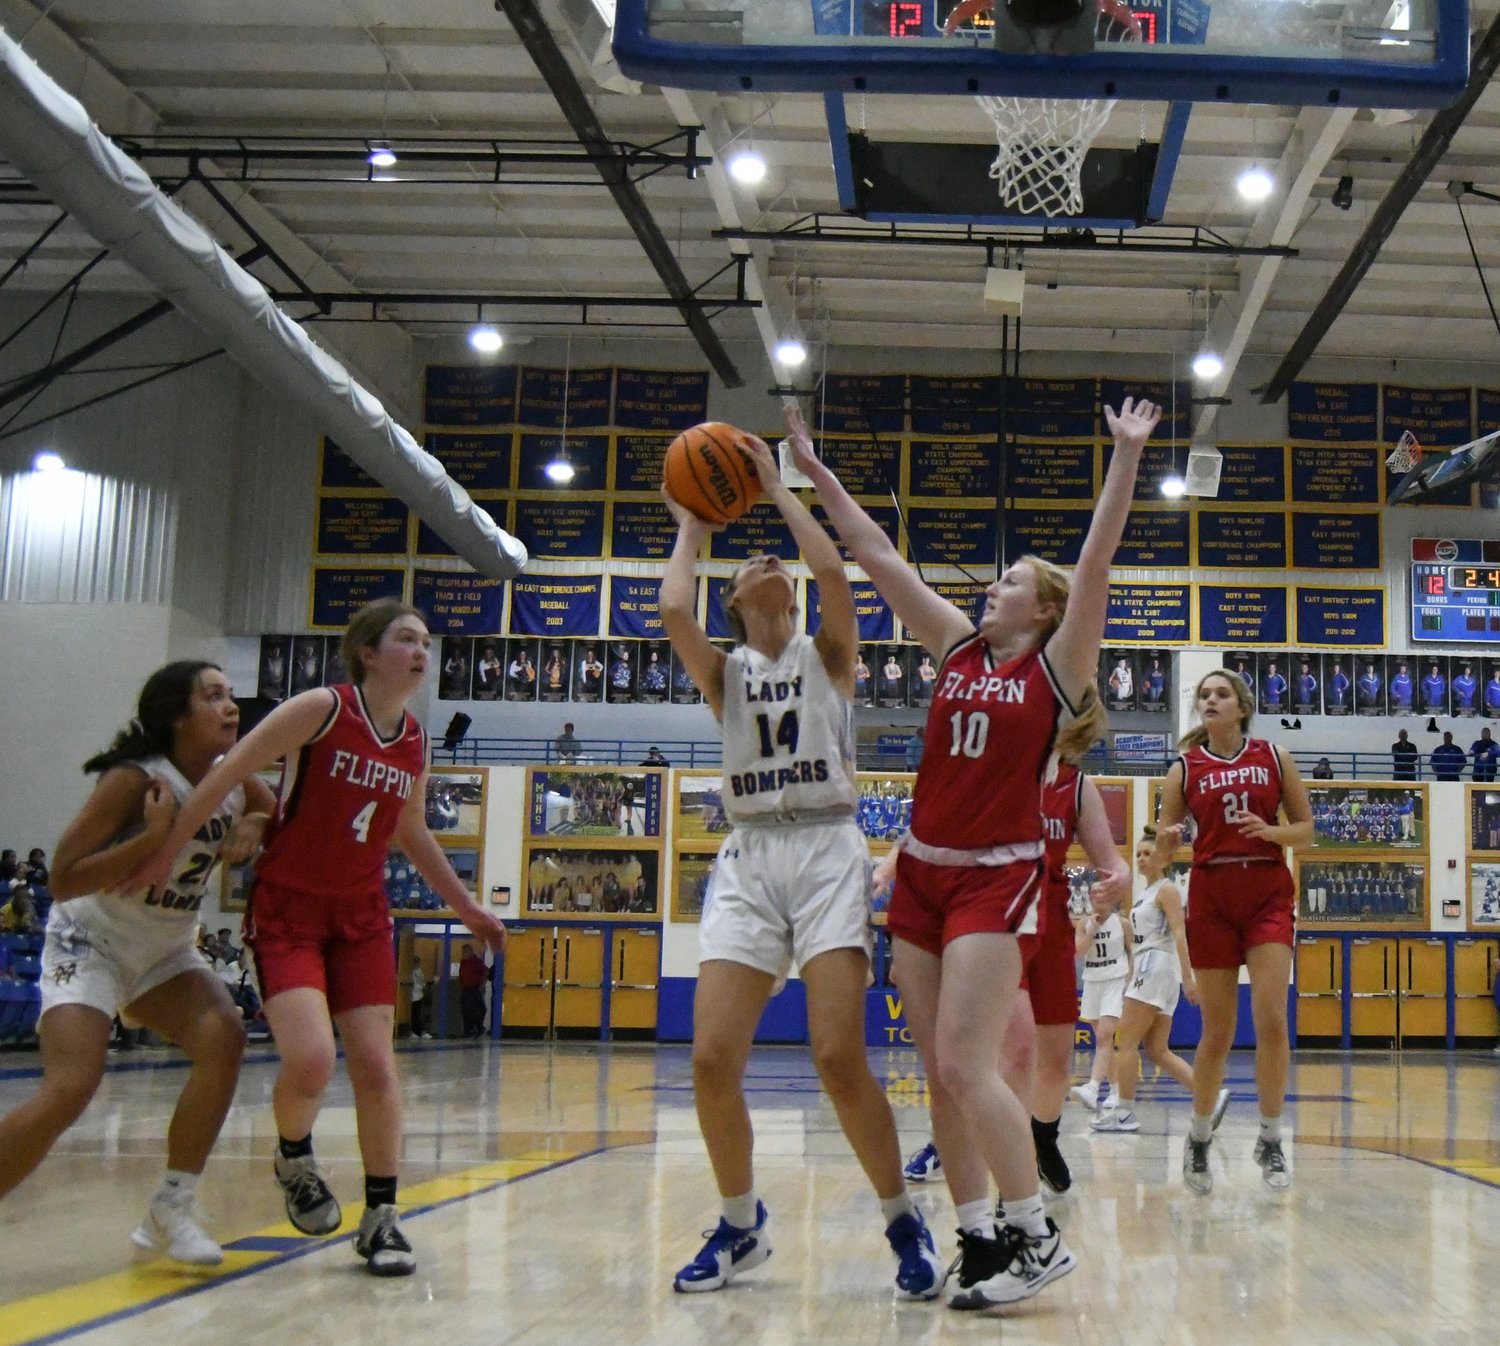 An image from the Mountain Home-Flippin senior girls game played Tuesday night at the Ultimate Auto Group Invitational at The Hangar.